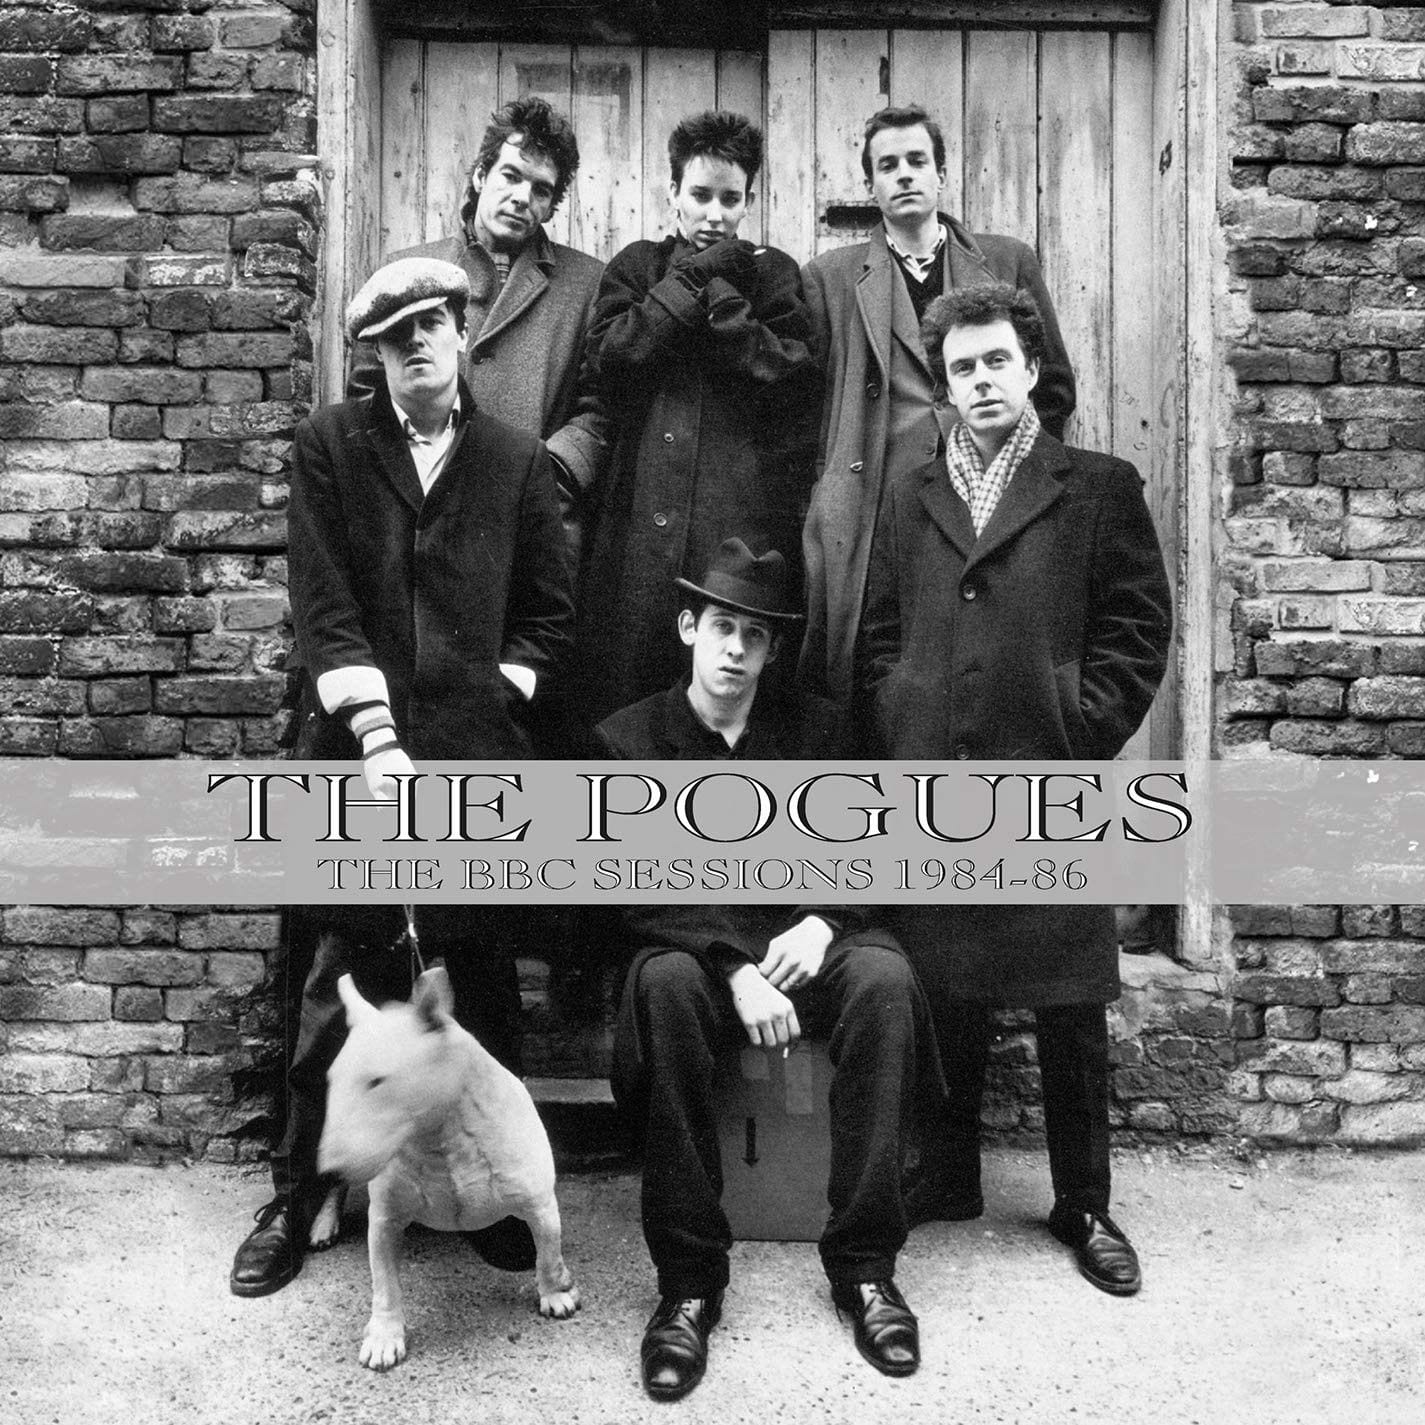 pogues-bbc-sessions-1984-1986